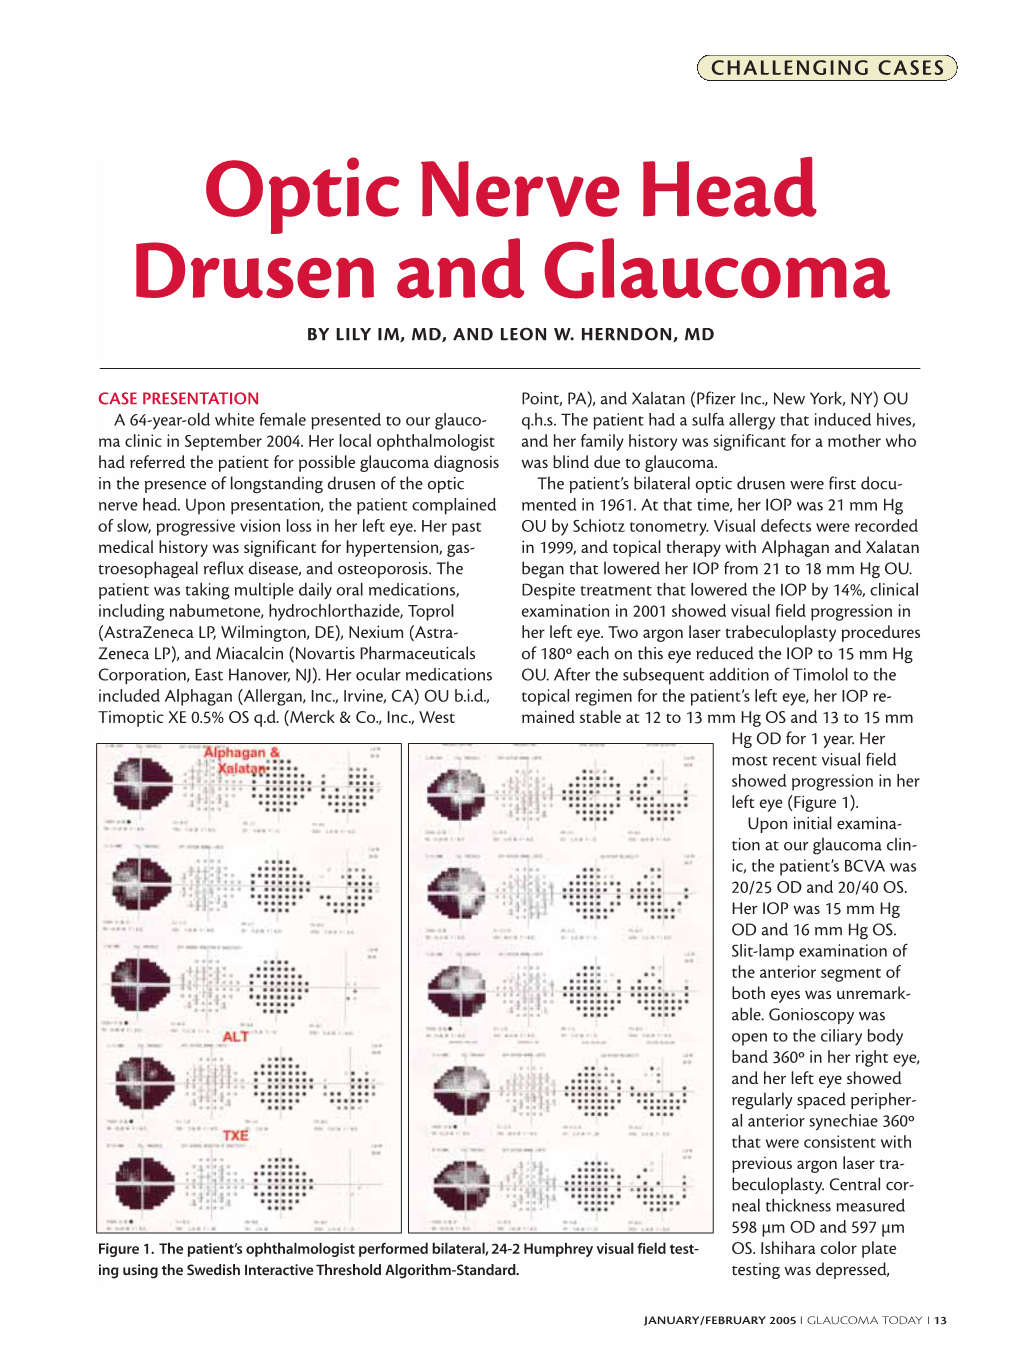 Optic Nerve Head Drusen and Glaucoma by LILY IM, MD, and LEON W